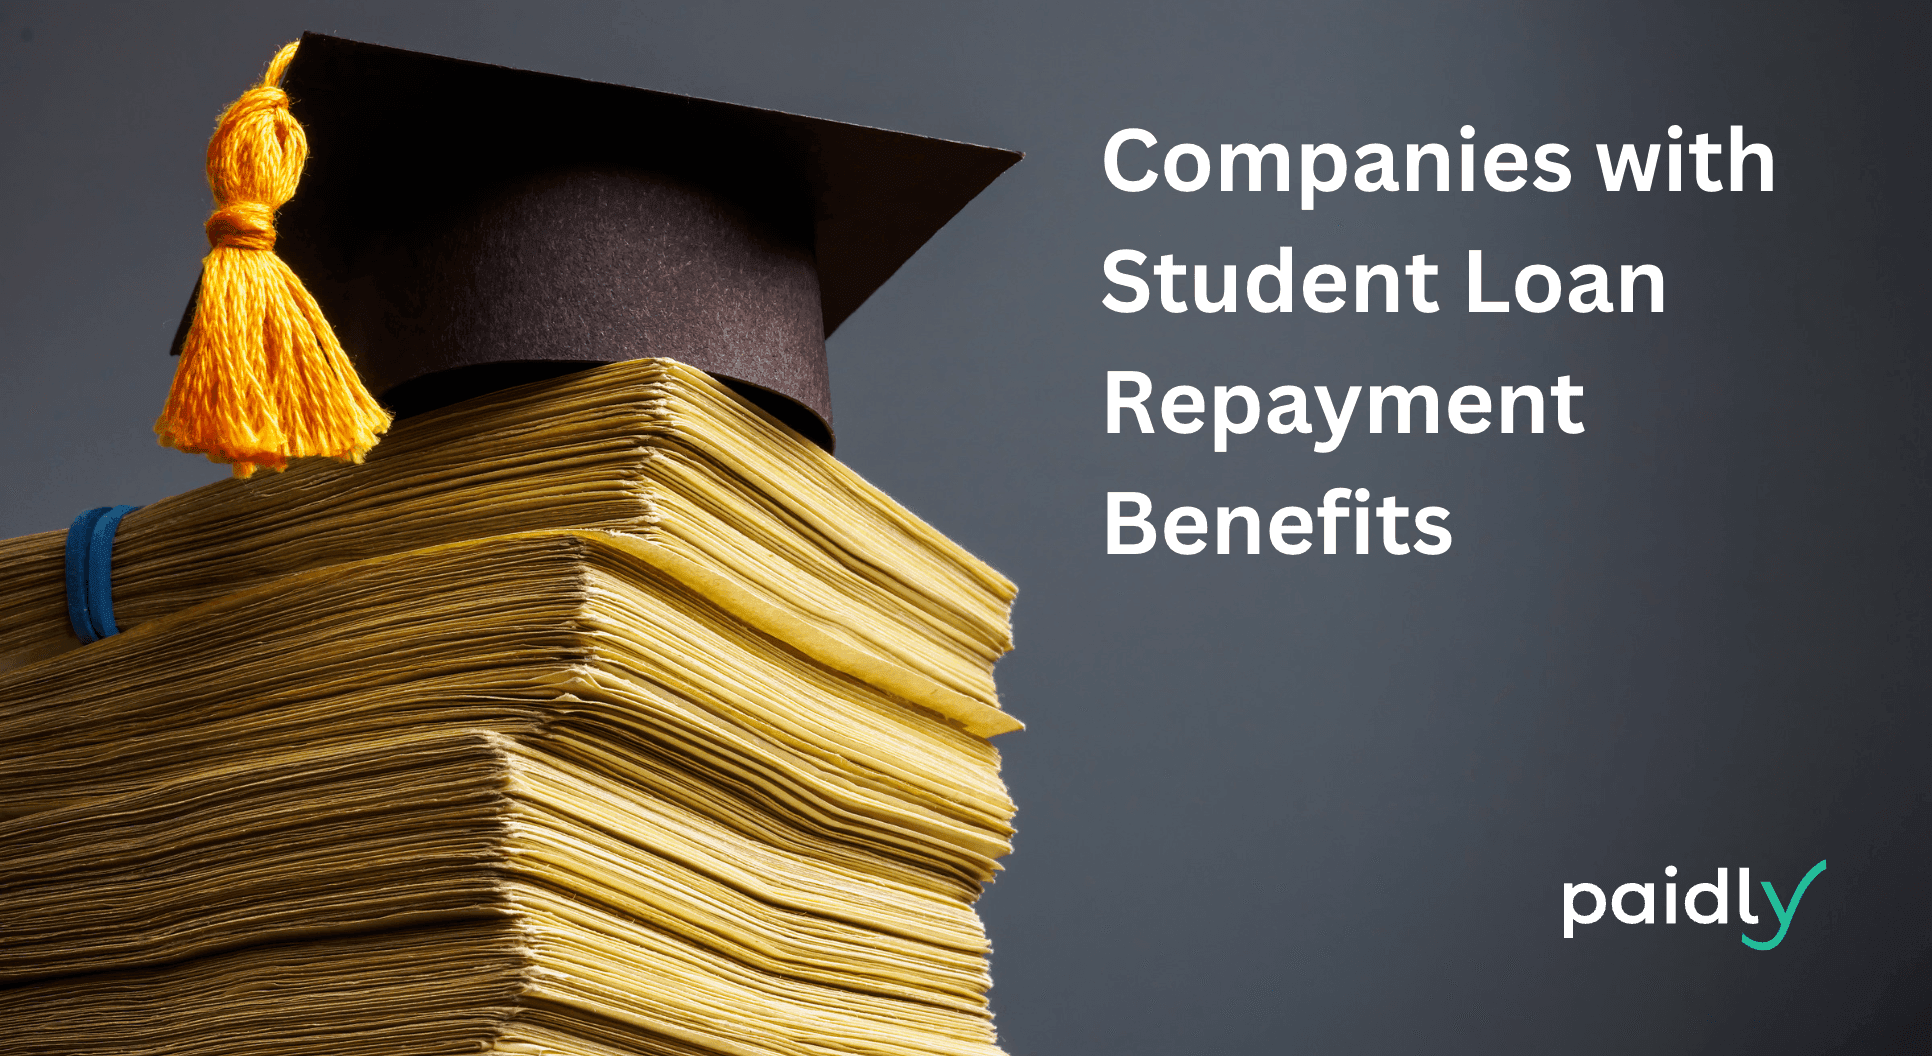 Companies with student loan repayment benefits